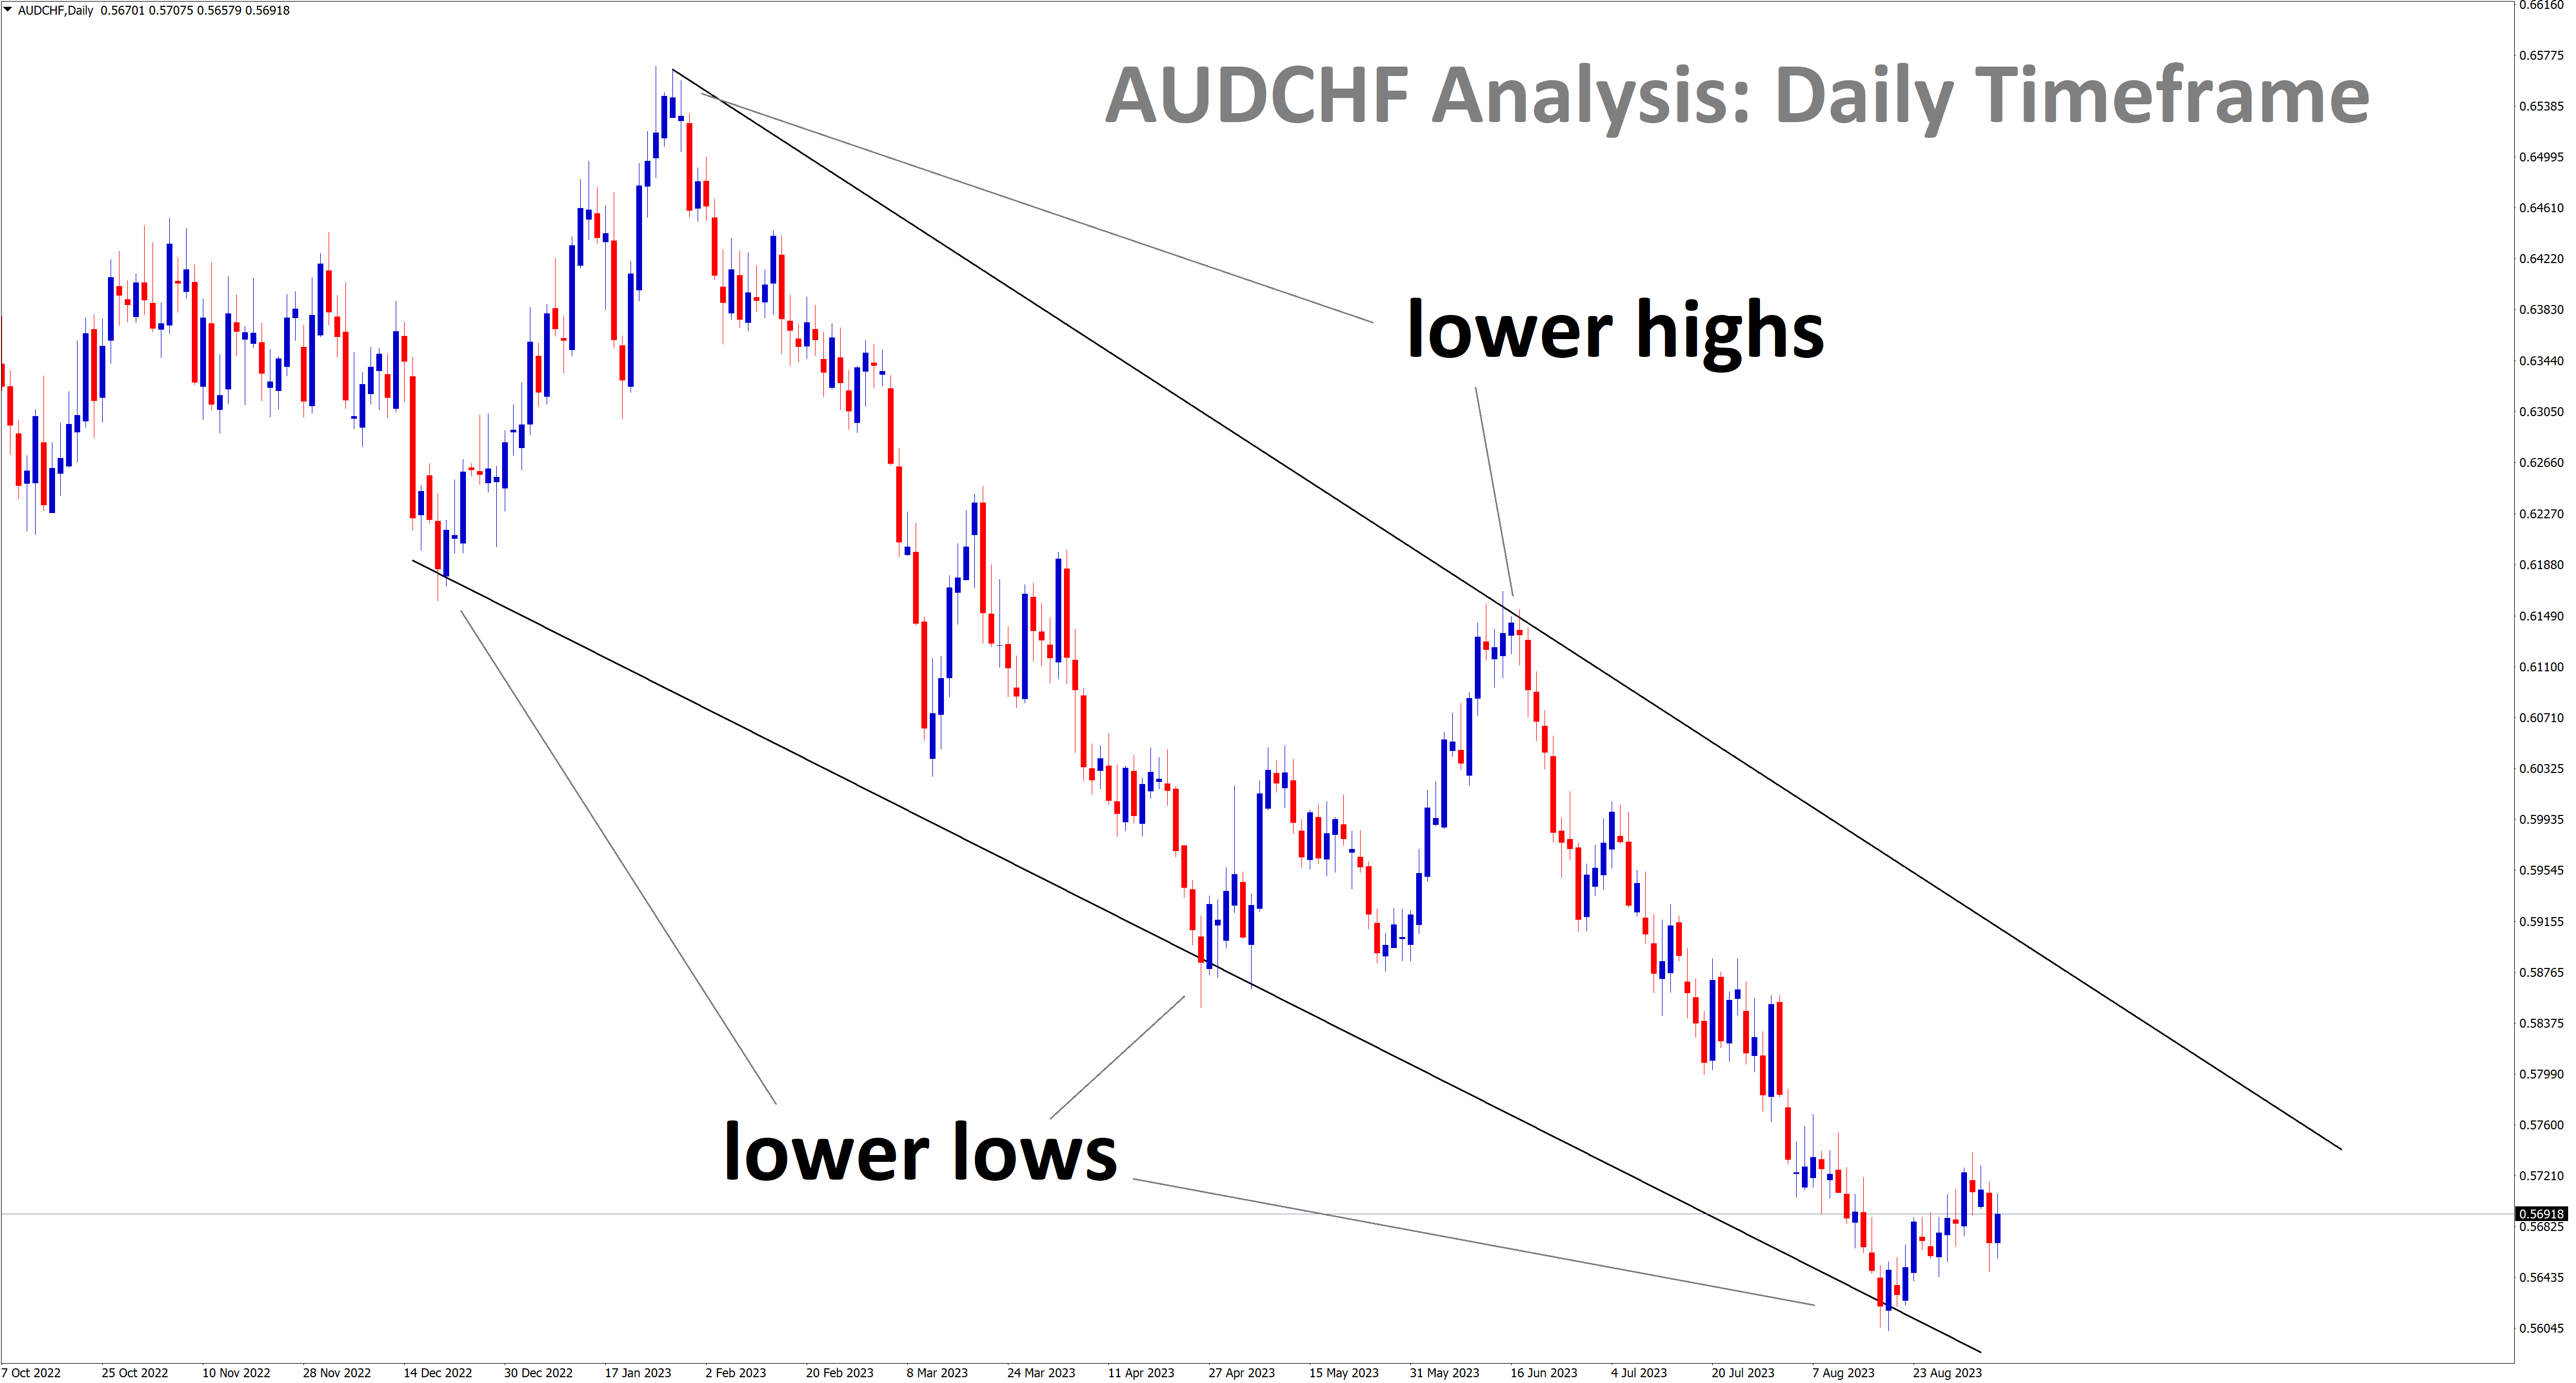 audchf rebounding from the lower low of falling wedge